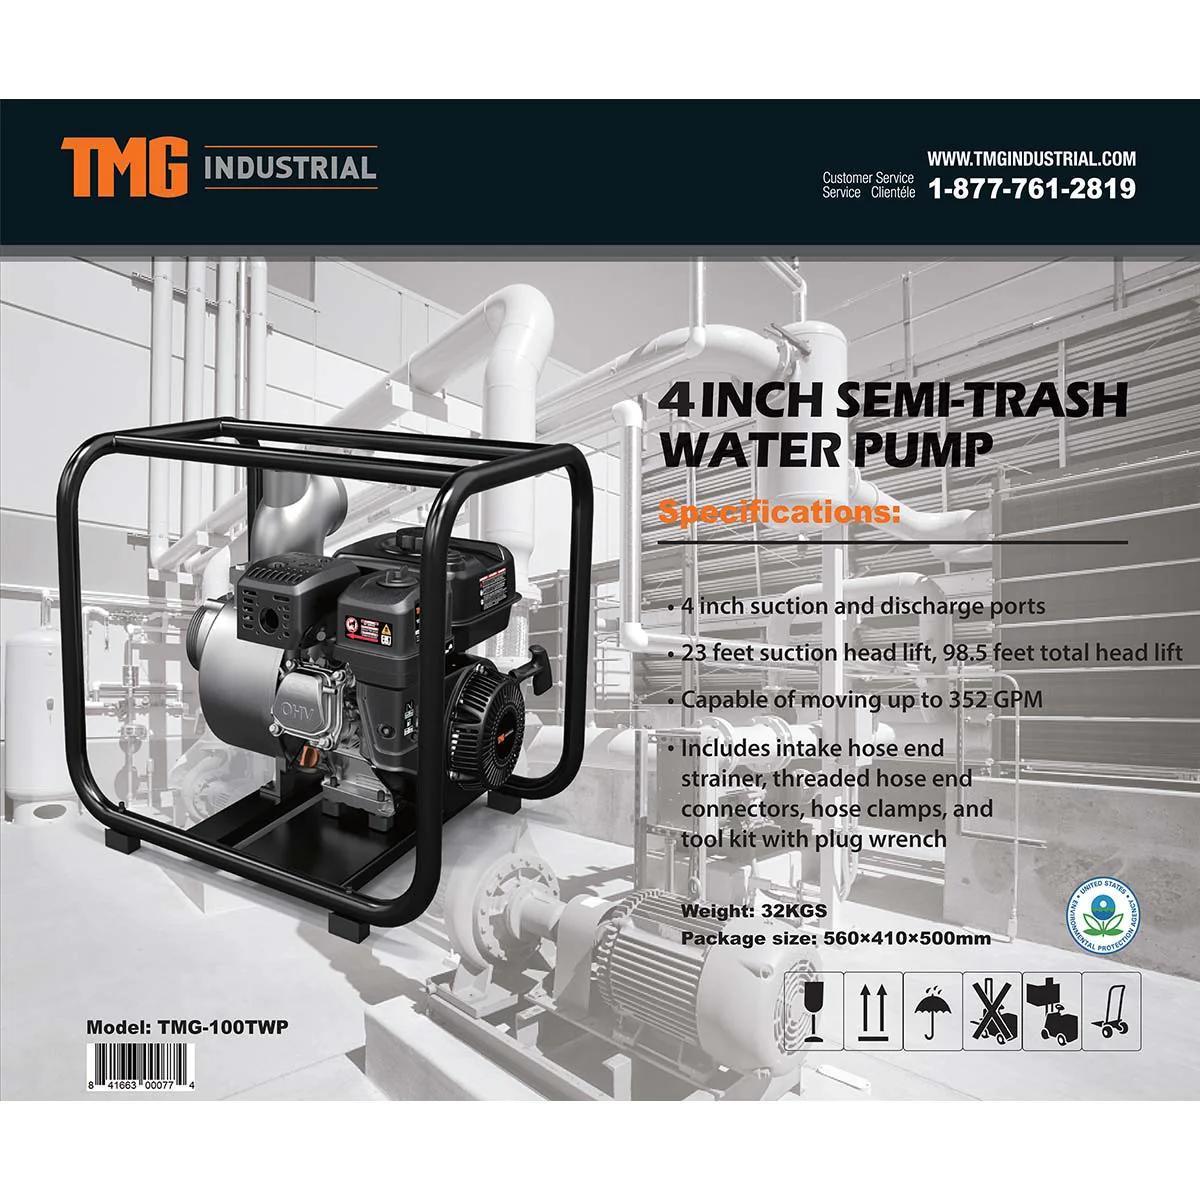 NEW SUPPORT EQUIPMENT New TMG 352 GPM 4" Semi-Trash Water Pump with 7.5 HP Gas Engine, LOCATED IN